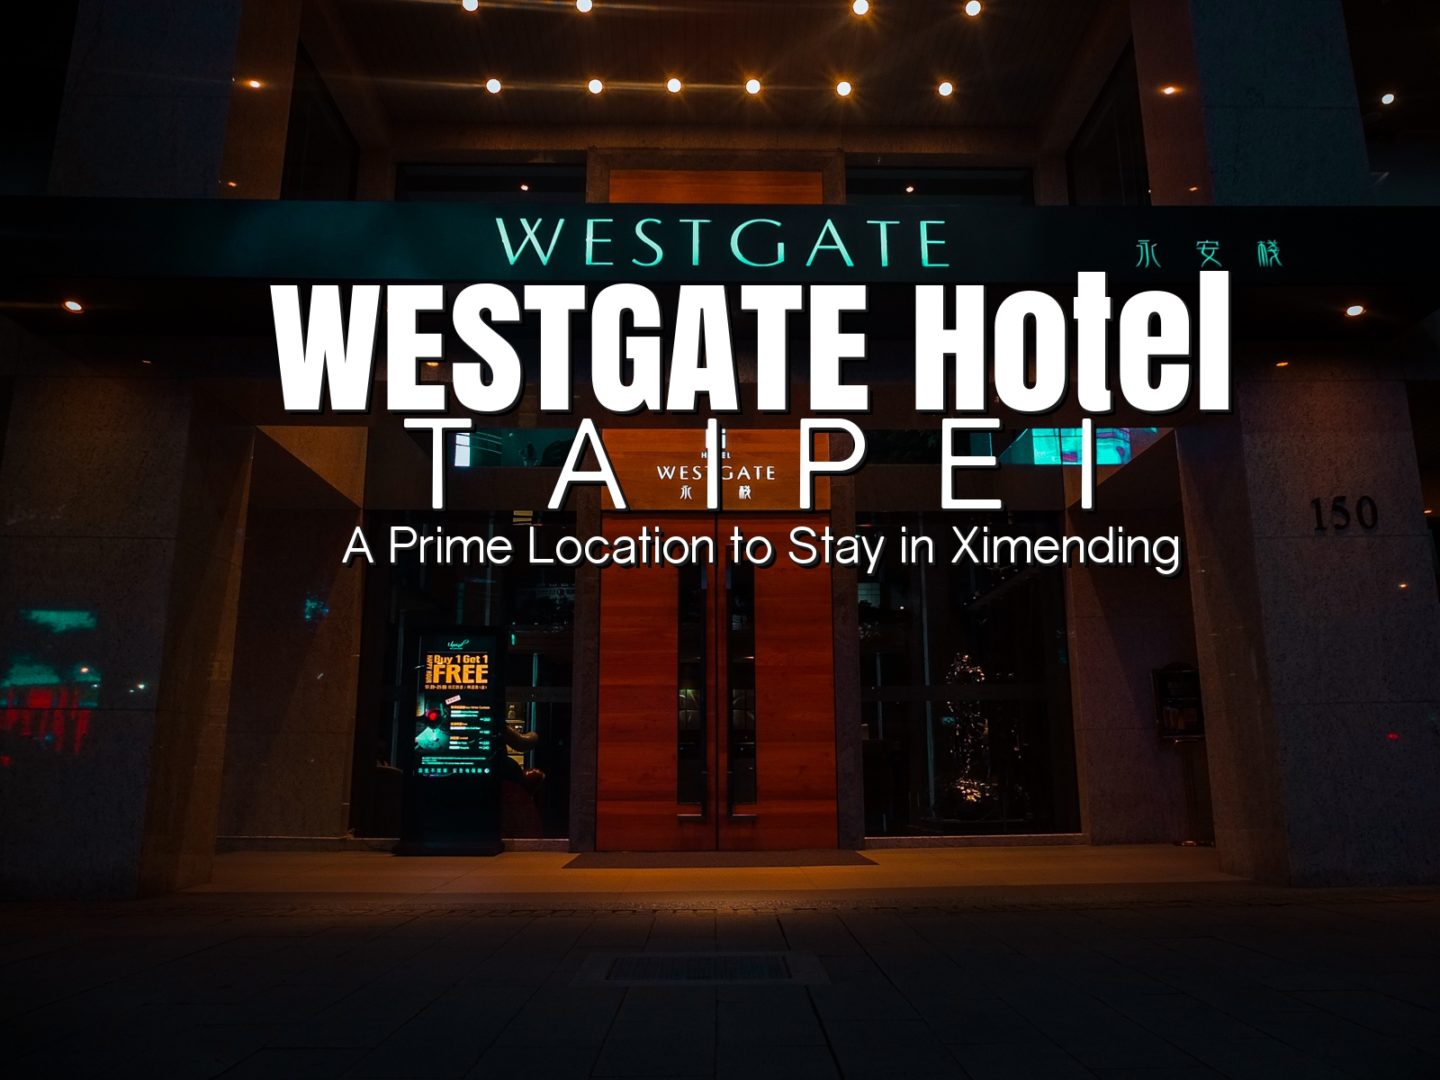 WESTGATE Hotel Taipei: A Prime Location to Stay in Ximending